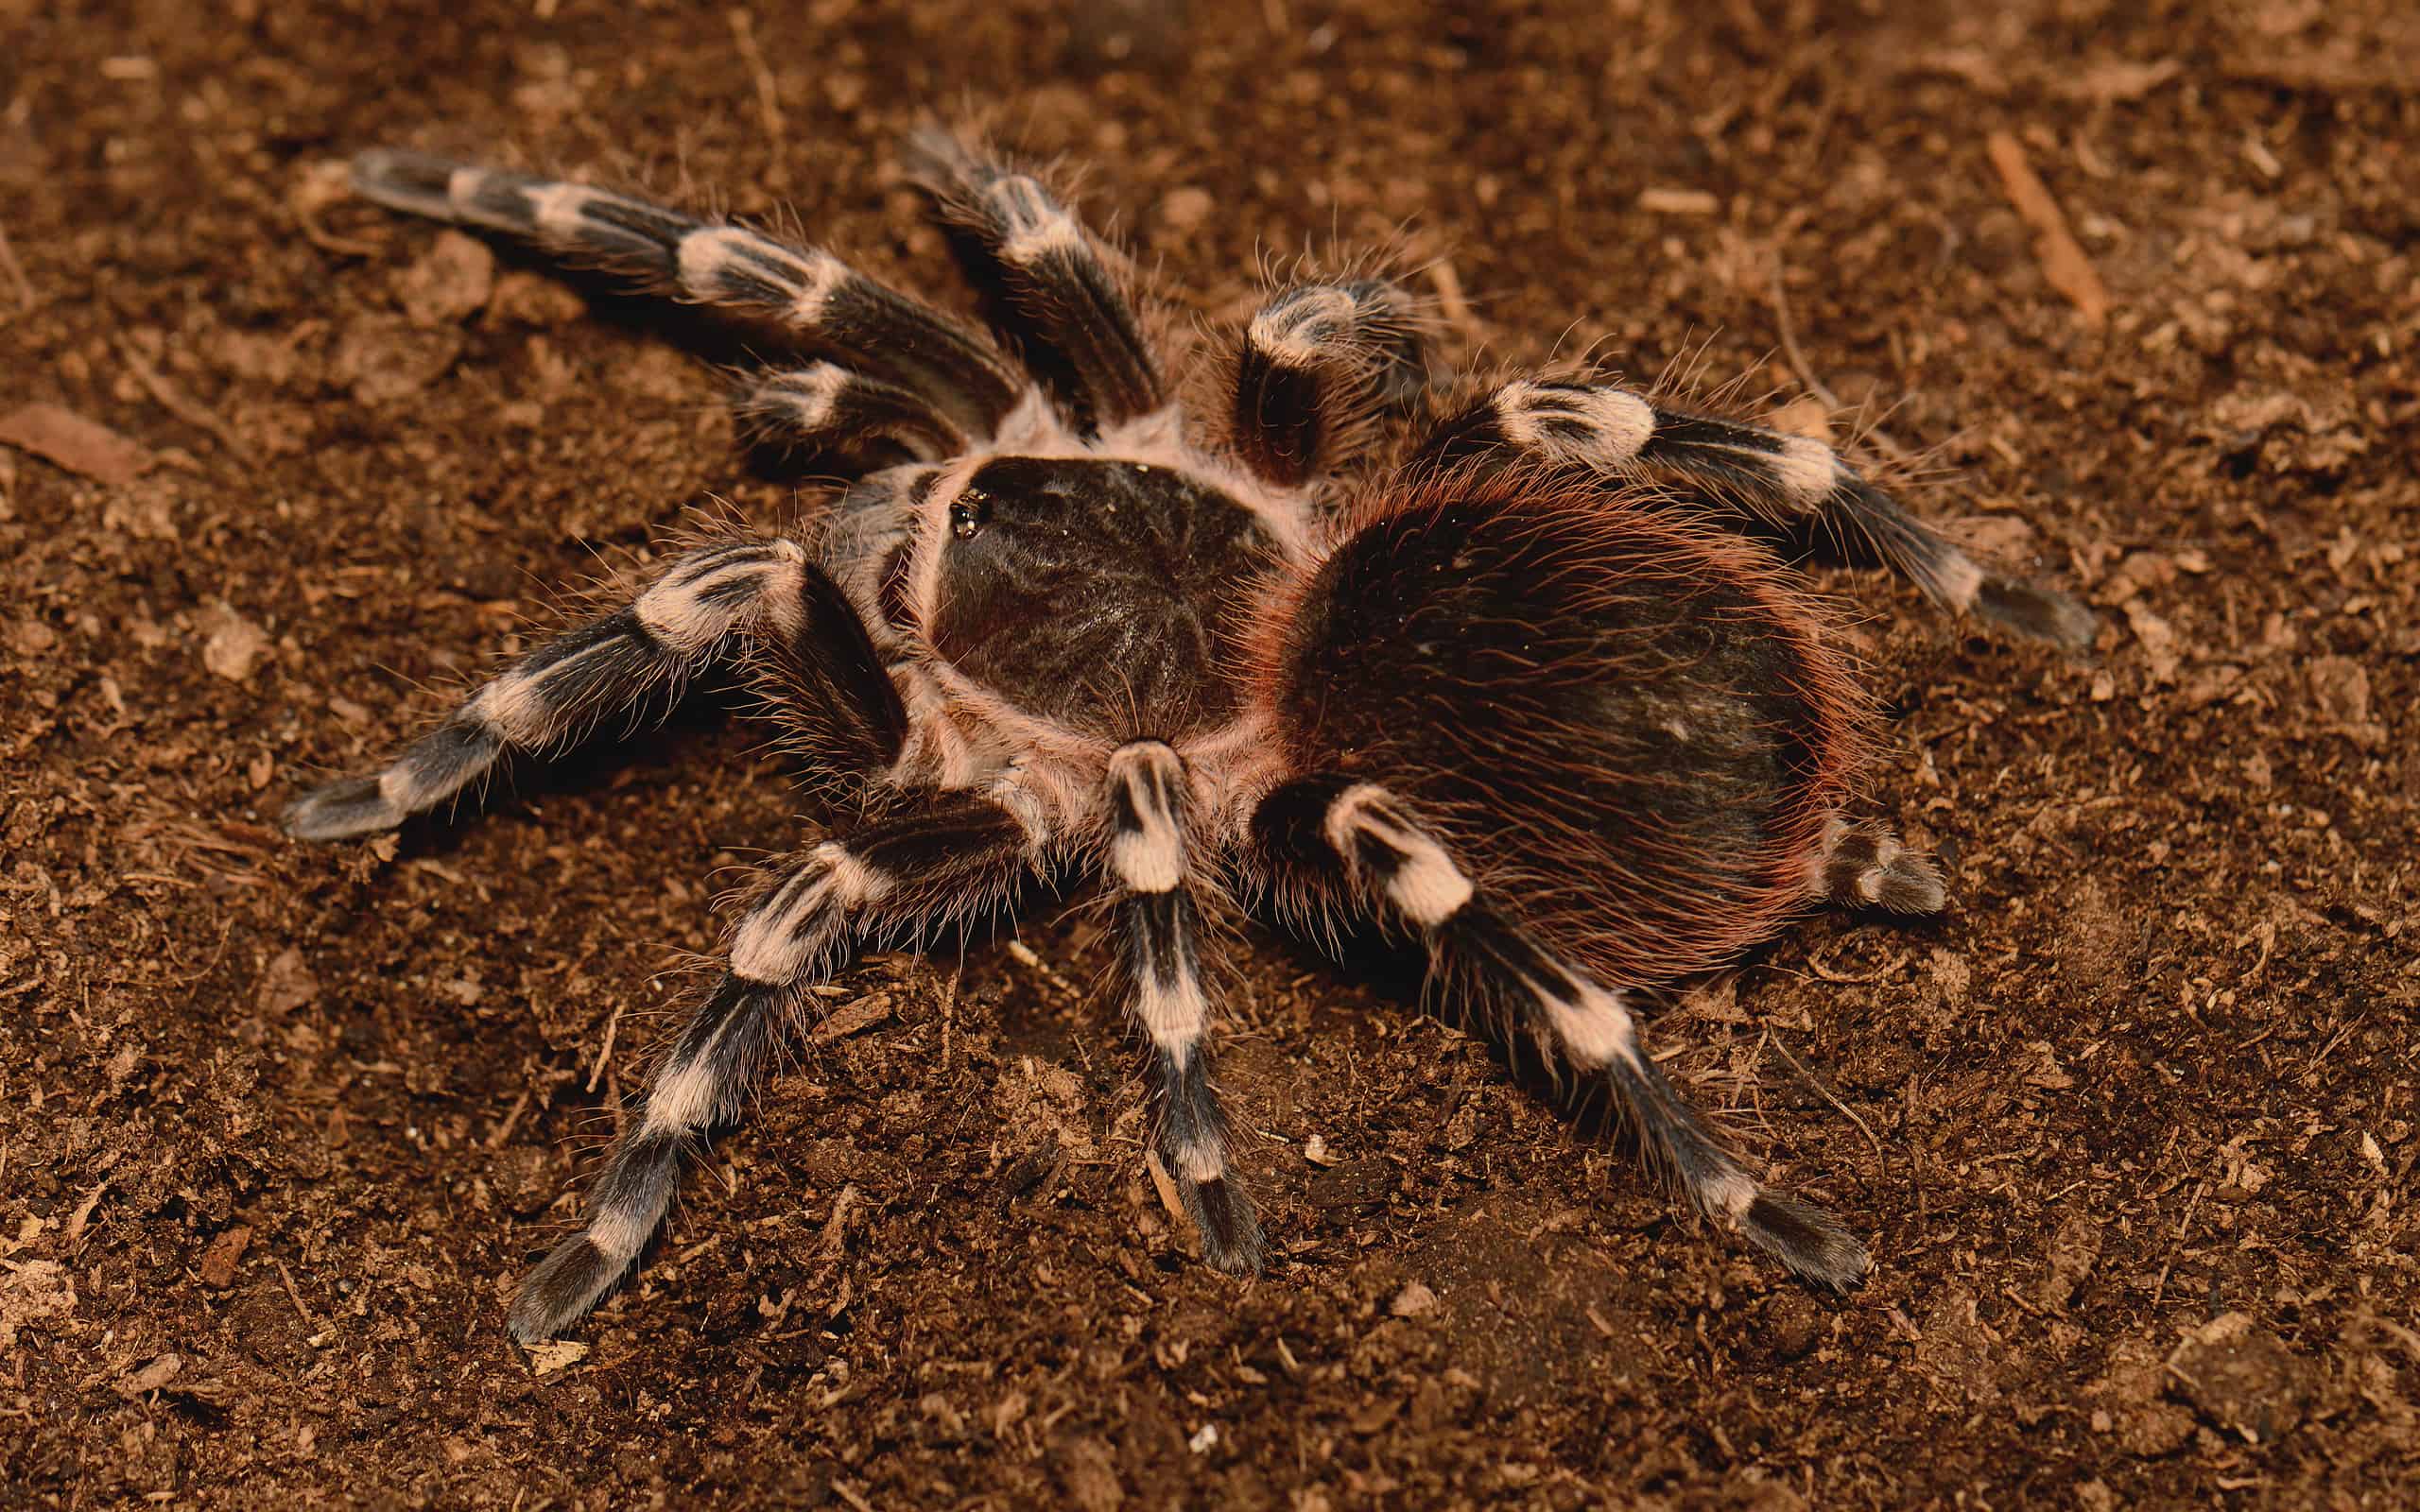 <p>The fuzzy Brazillian white tarantula lives throughout Brazil's rainforests. They grow to have an incredible leg span of 8.5 inches. </p>